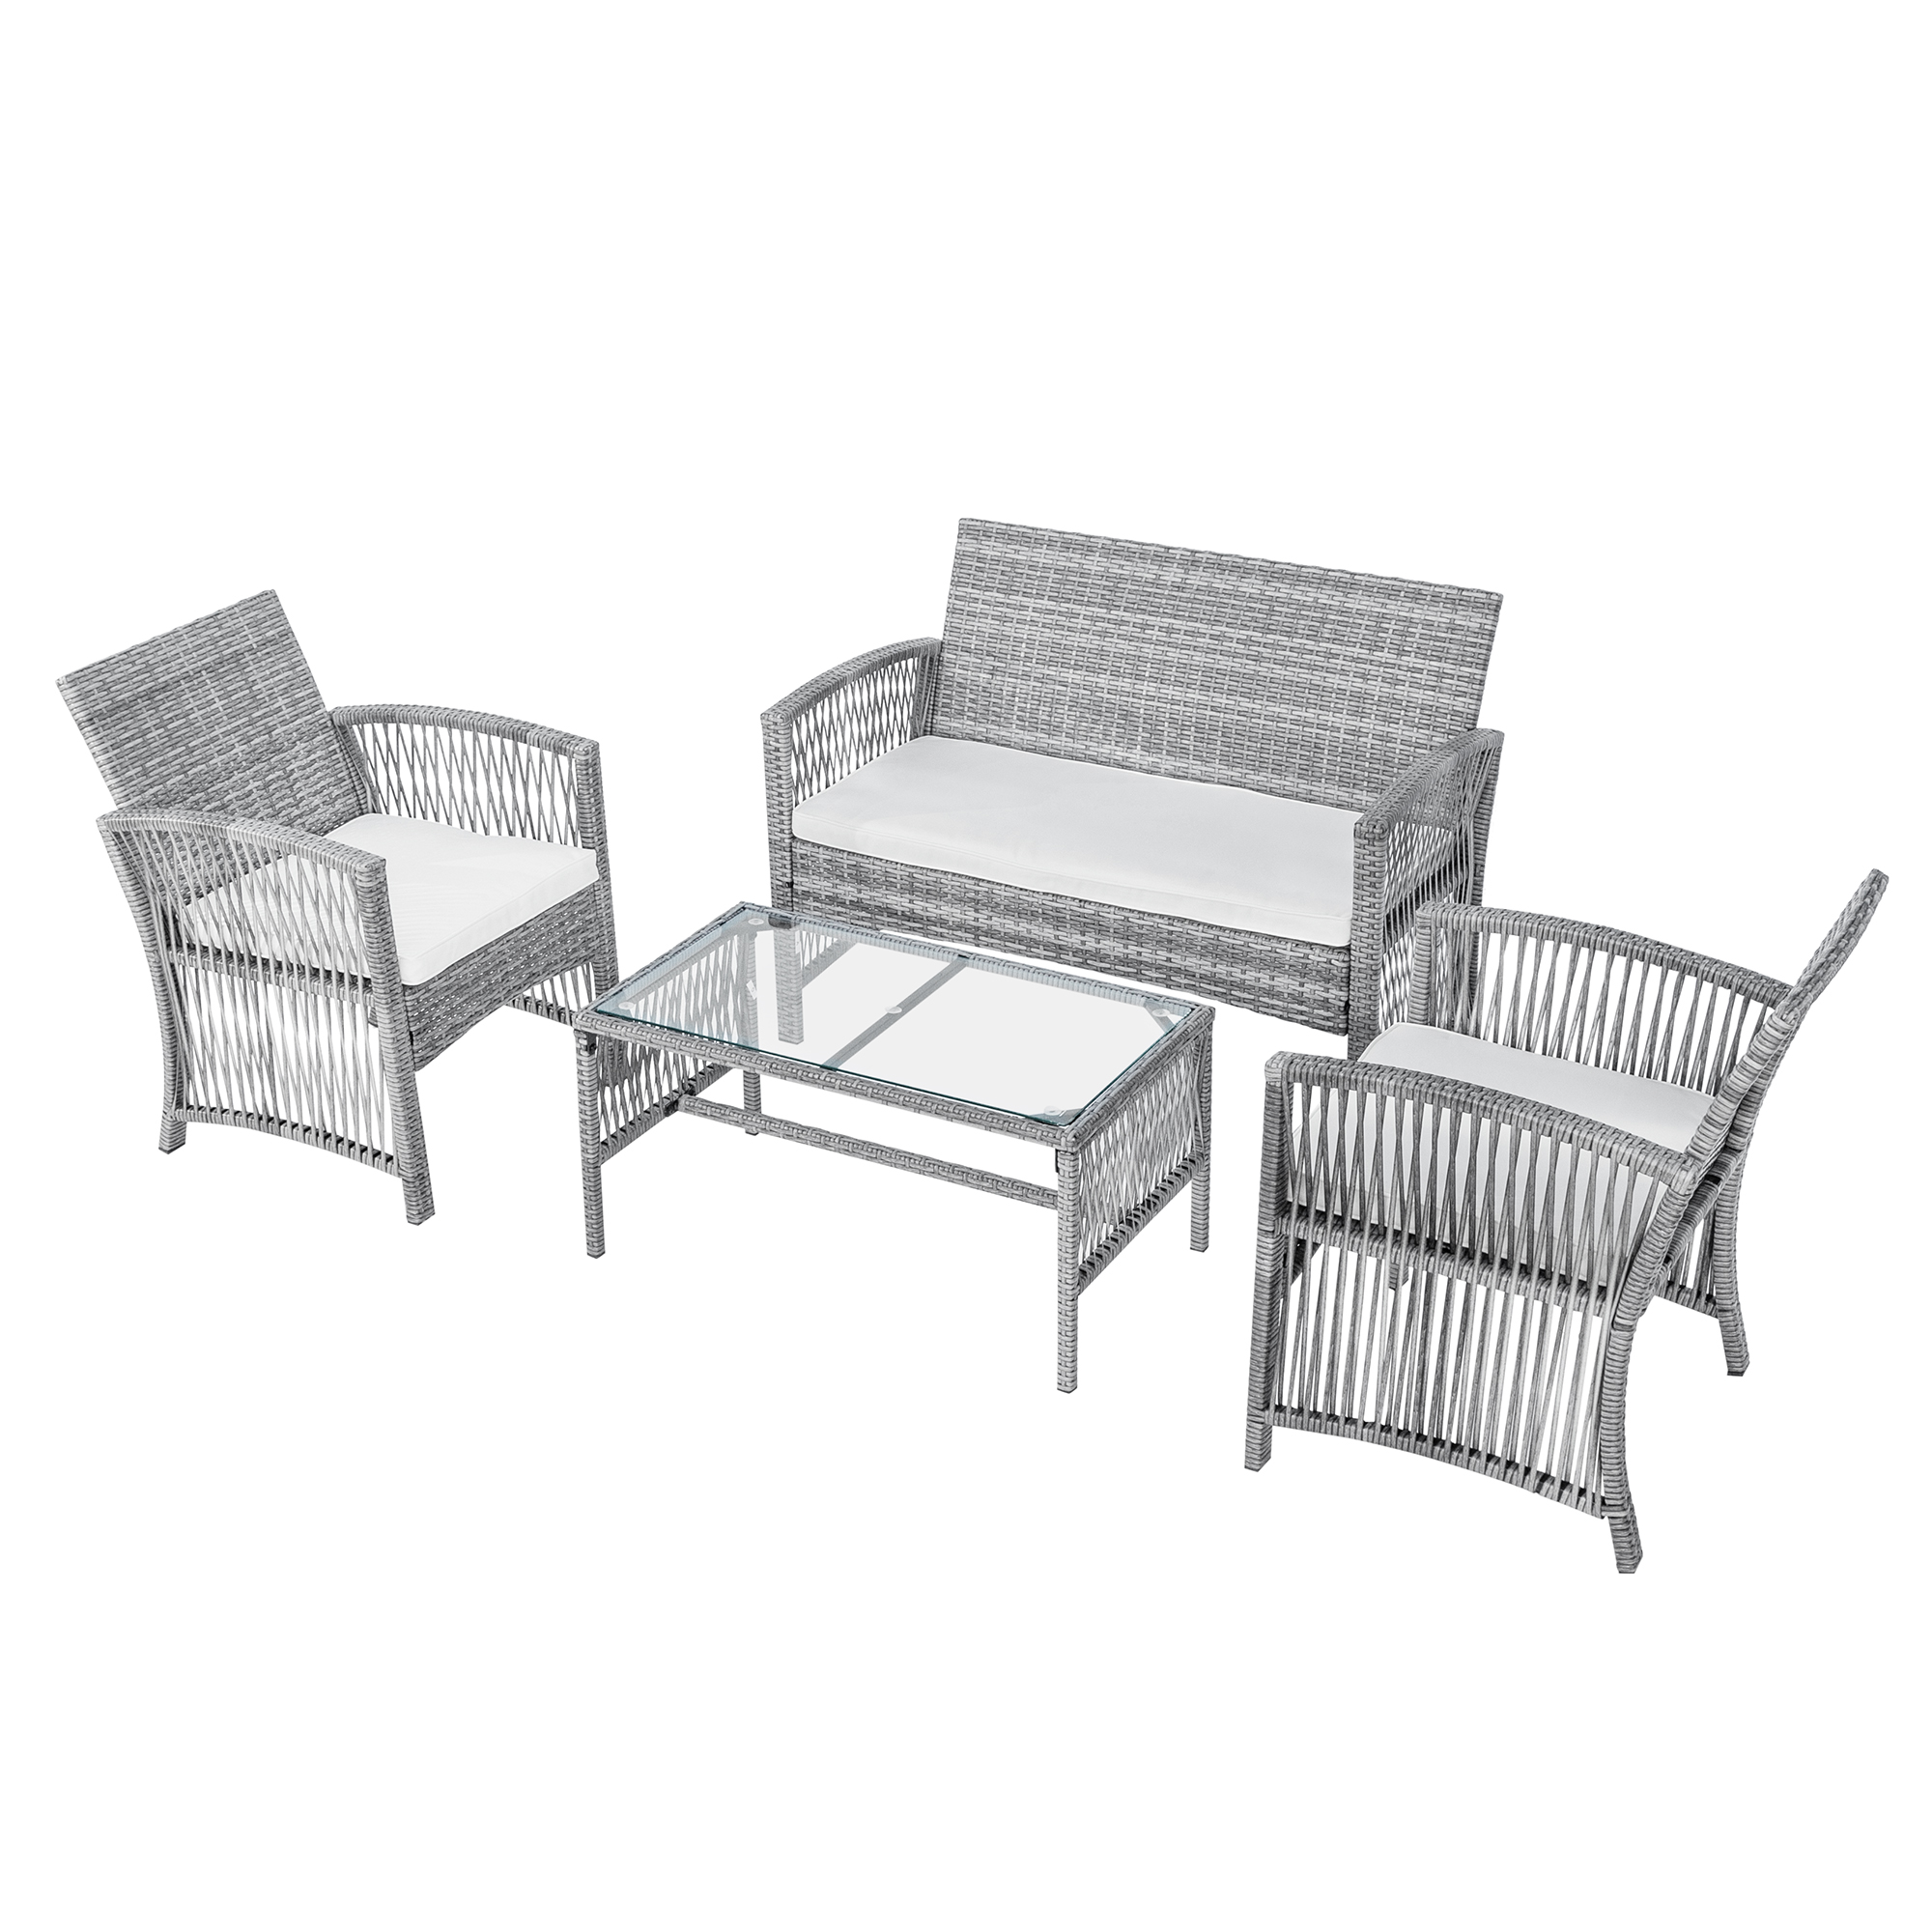 Outdoor Patio Furniture Sets, 4 Piece Gray Wicker Outdoor Porch Conversation Sets, 2pcs Arm Chairs, 1pc Loveseat&Coffee Table, Patio Bar Set, Dining Set for Backyard Lawn Porch Poolside Garden, W7776 - image 4 of 11